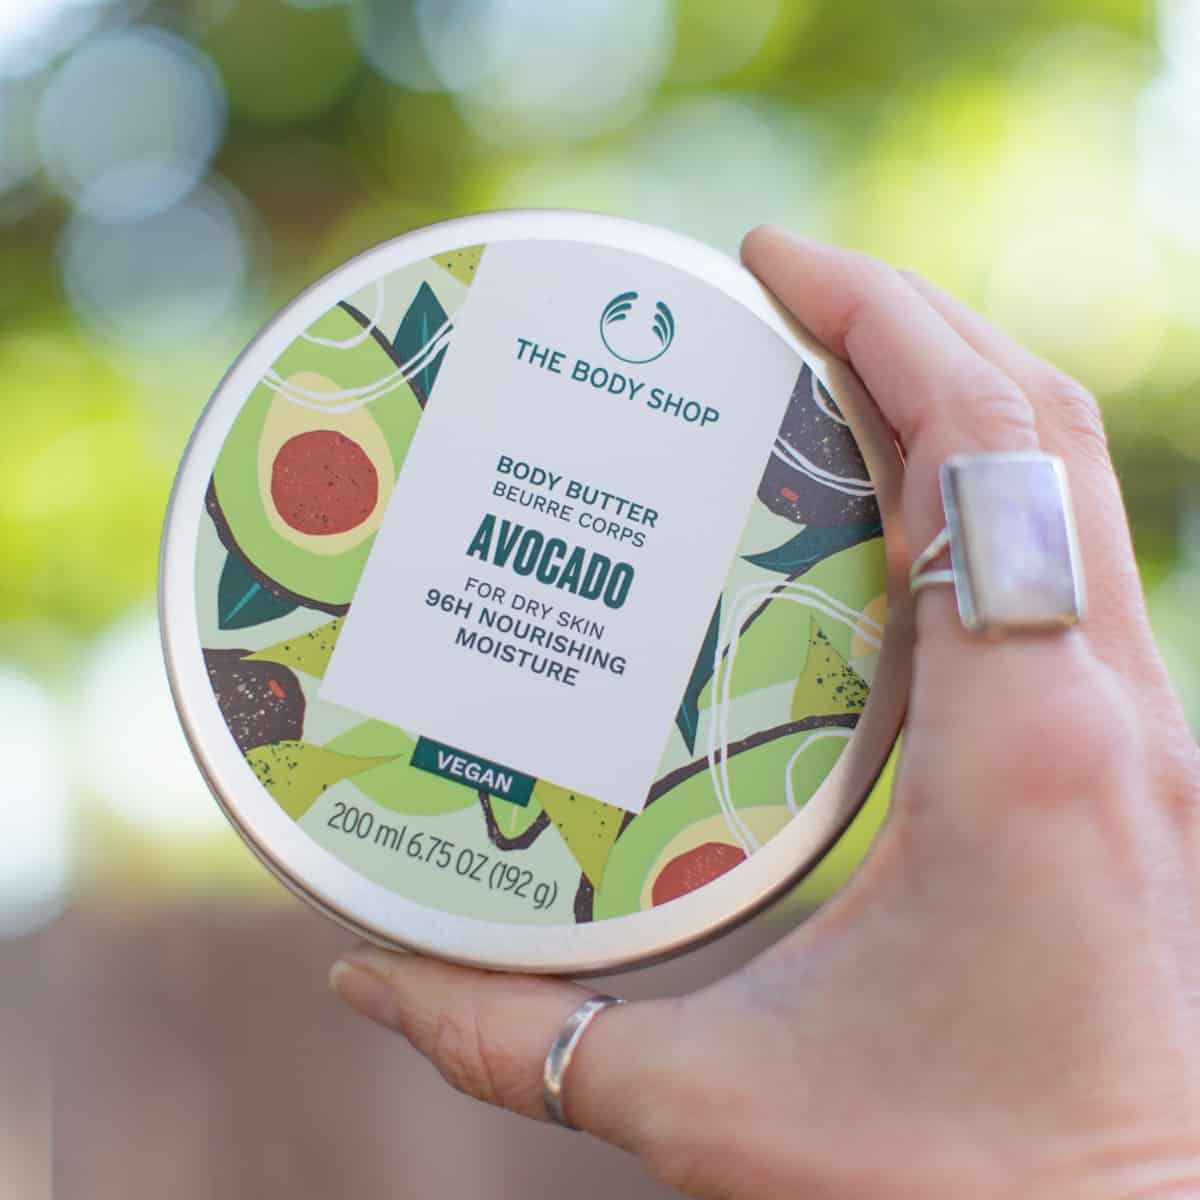 A tin of Avocado body butter for dry skin from The Body Shop brand of vegan lotion.